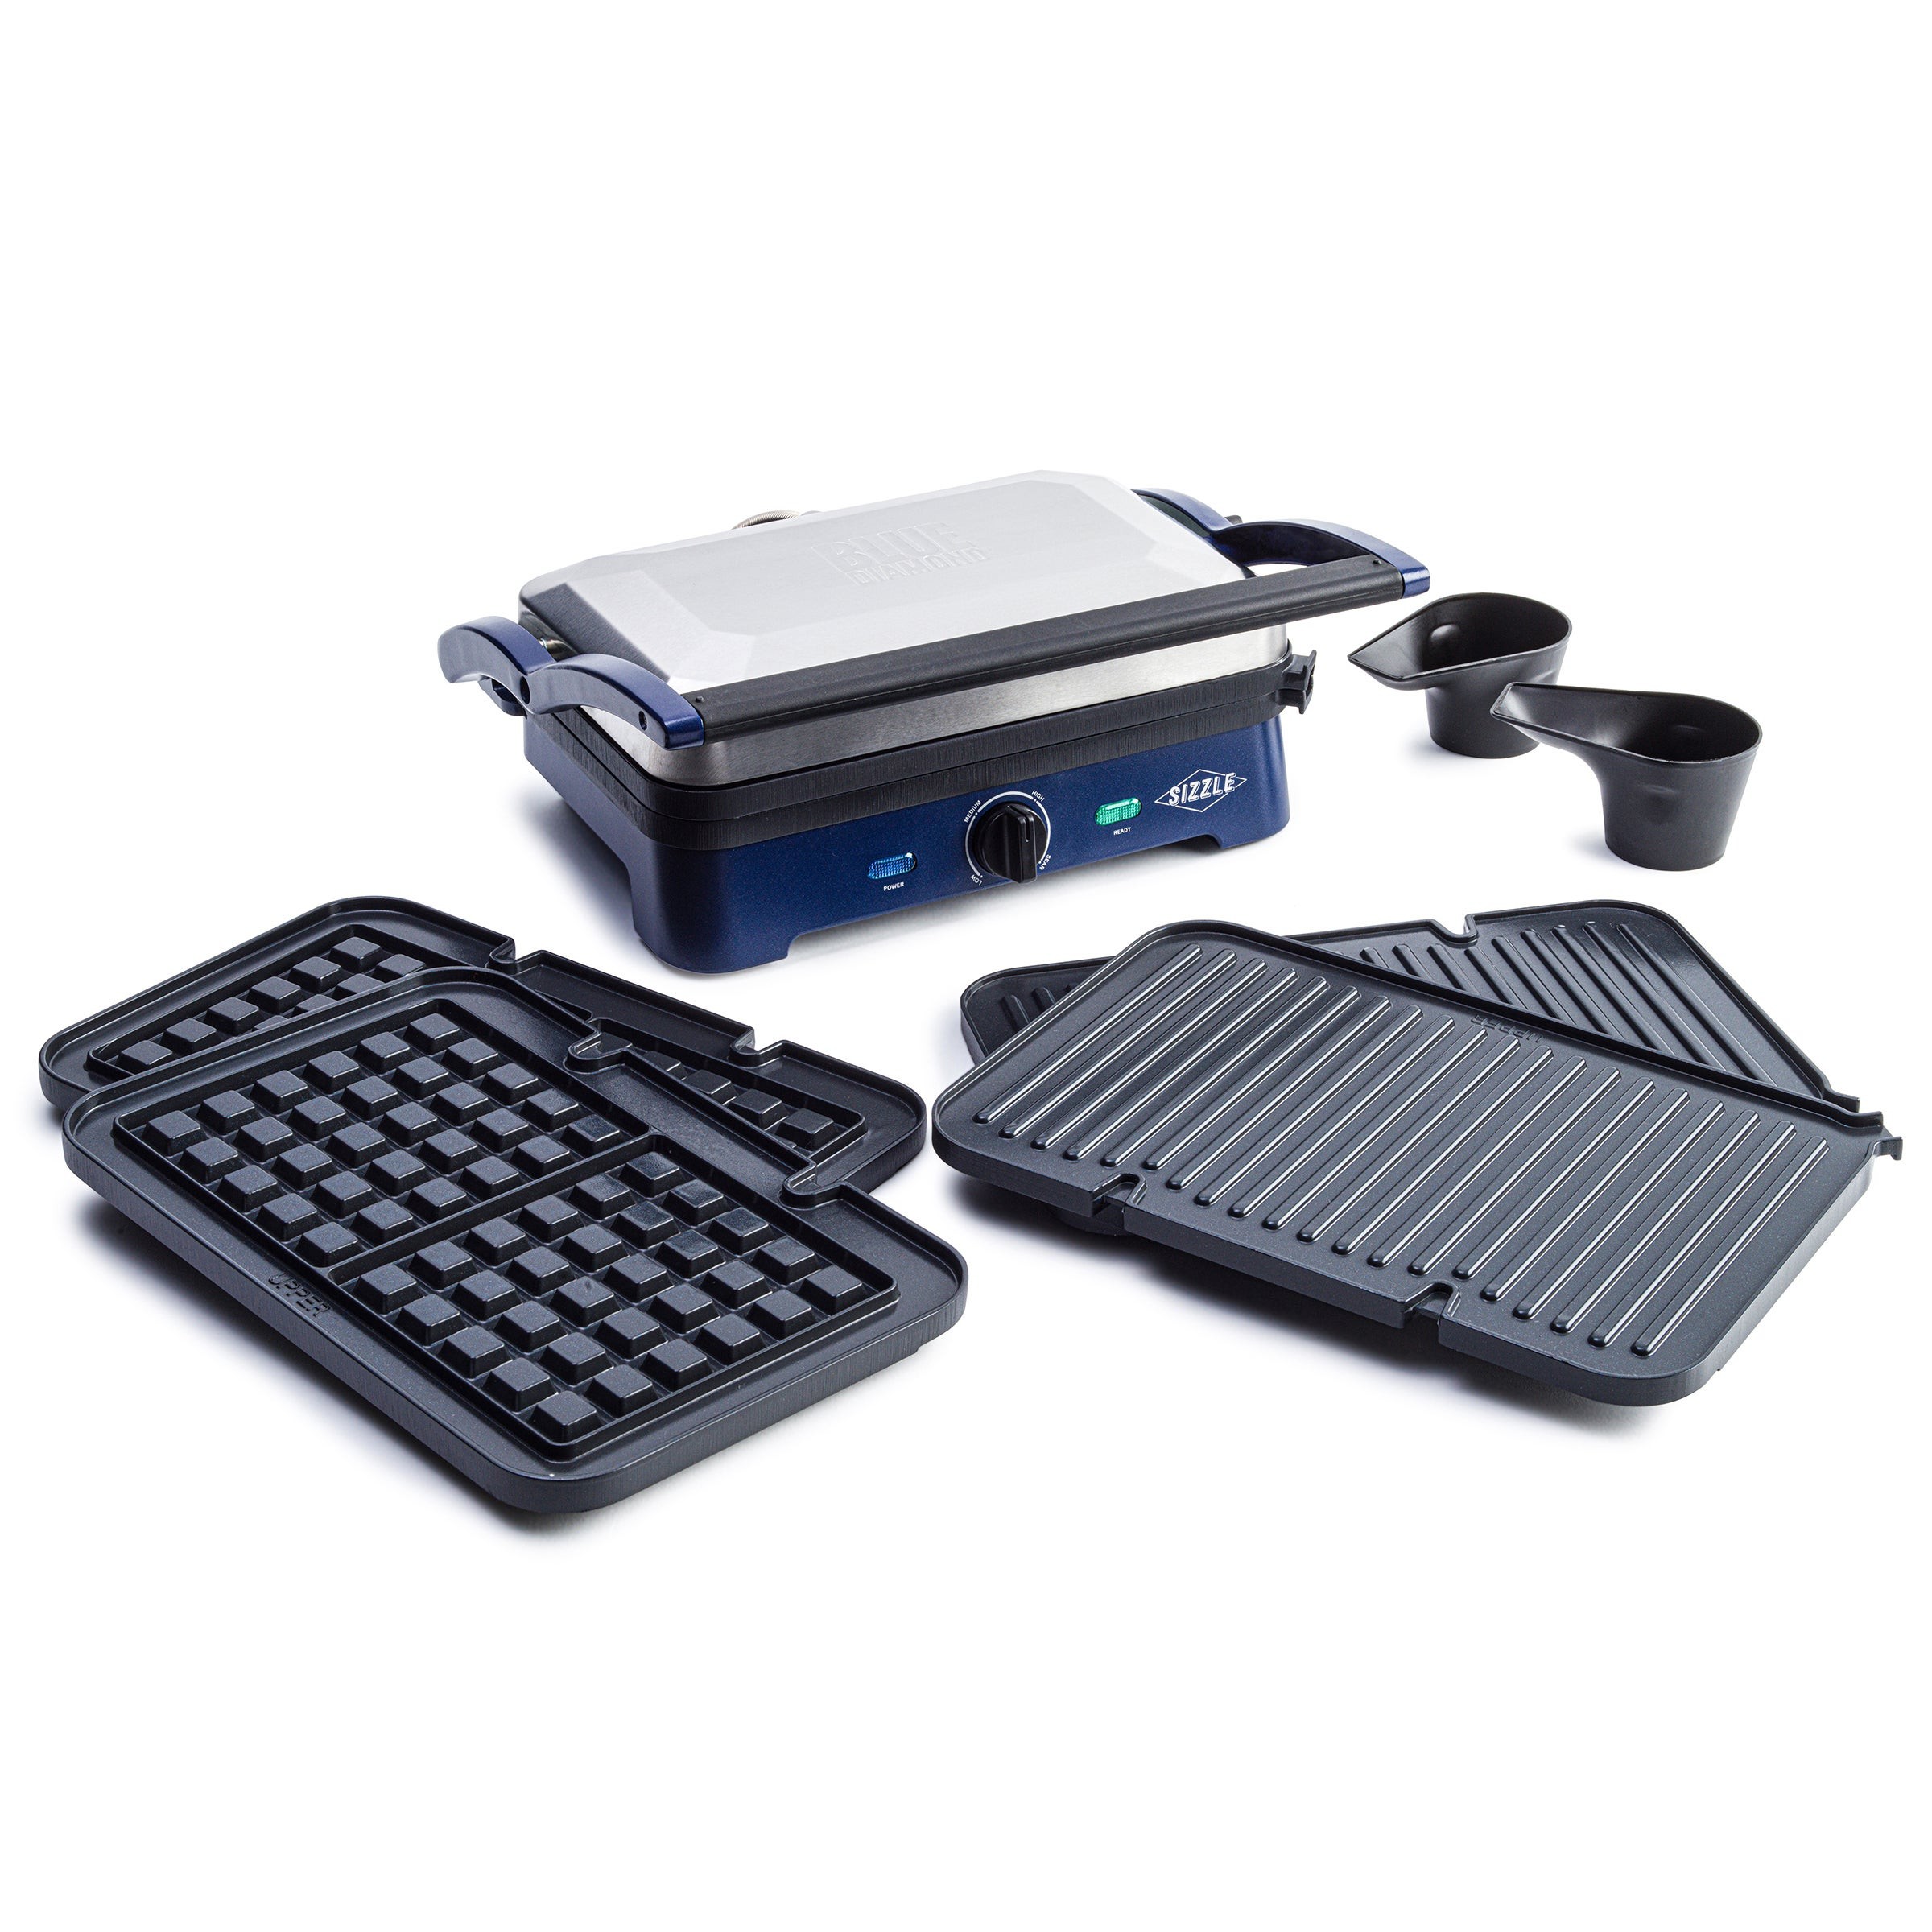 Sizzle Griddle Deluxe Pro Ceramic Nonstick Griddle w/ Waffle/Grill Plates